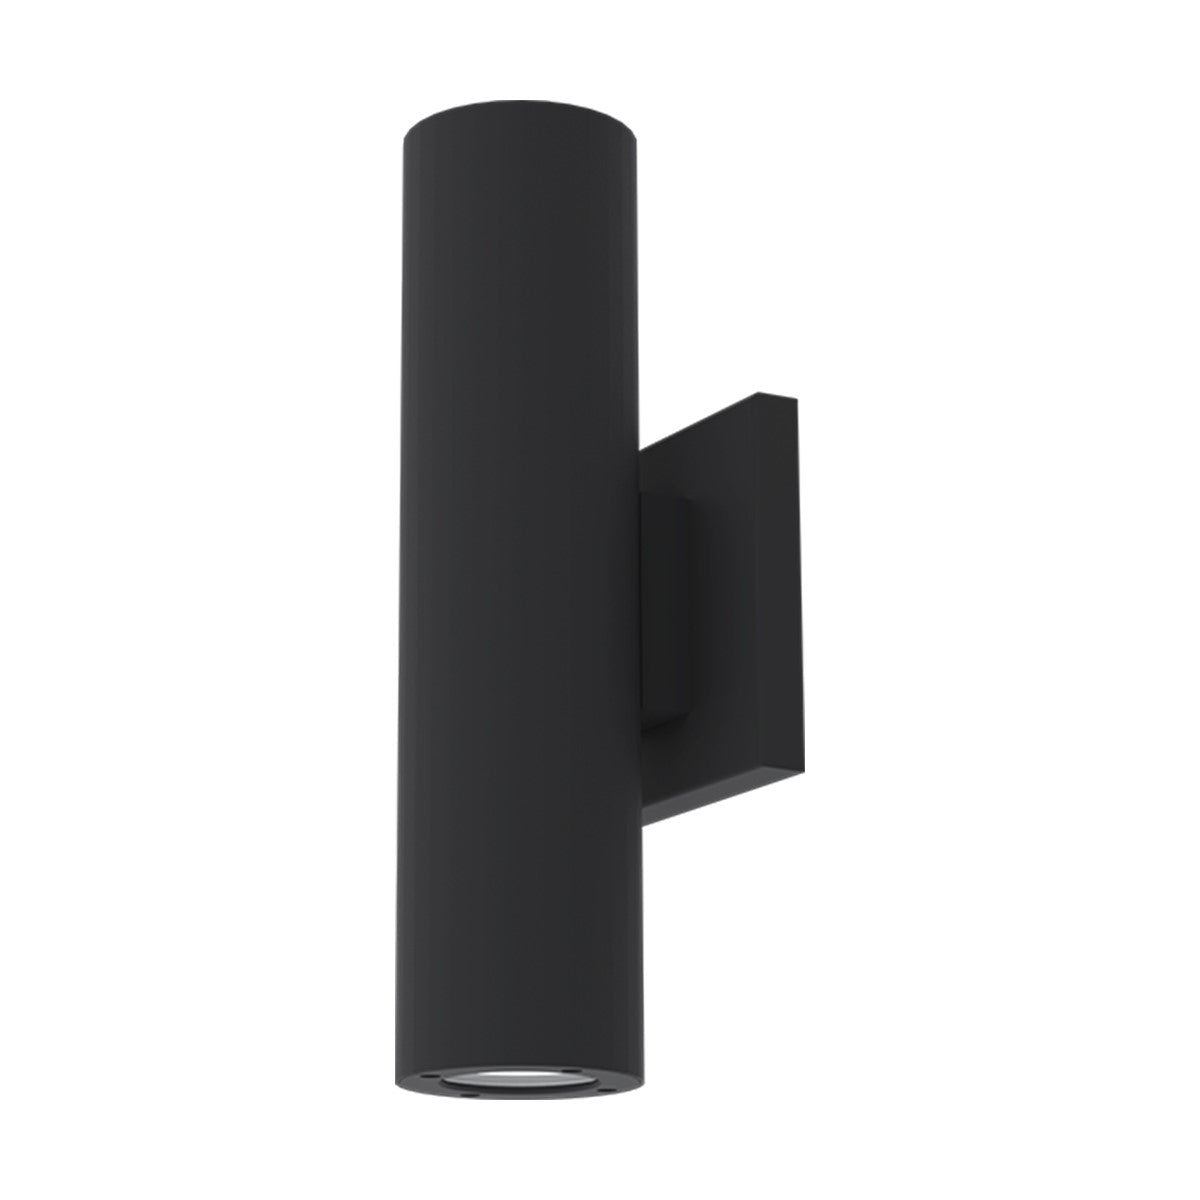 Volta 11 In 2 Lights Dual Sided Smart Outdoor Cylinder Wall Light Up/Down Light Black Finish